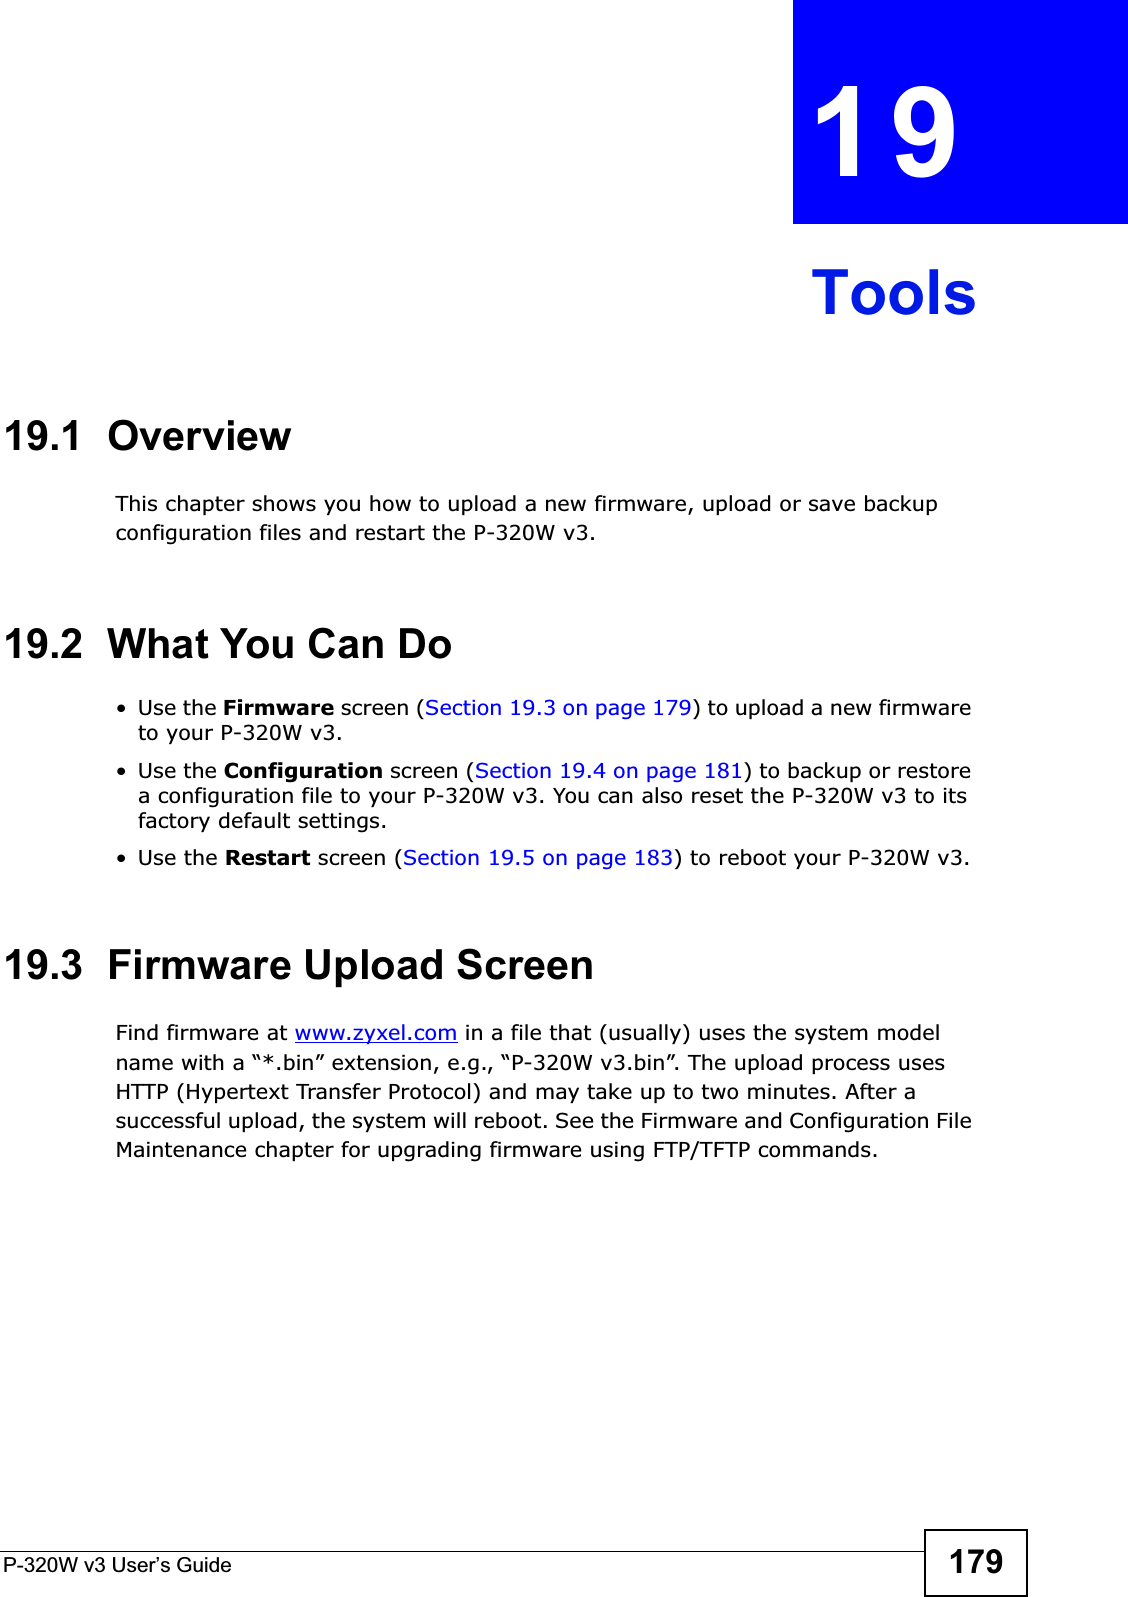 P-320W v3 User’s Guide 179CHAPTER 19Tools19.1  OverviewThis chapter shows you how to upload a new firmware, upload or save backup configuration files and restart the P-320W v3.19.2  What You Can Do•Use the Firmware screen (Section 19.3 on page 179) to upload a new firmware to your P-320W v3.•Use the Configuration screen (Section 19.4 on page 181) to backup or restore a configuration file to your P-320W v3. You can also reset the P-320W v3 to its factory default settings.•Use the Restart screen (Section 19.5 on page 183) to reboot your P-320W v3.19.3  Firmware Upload ScreenFind firmware at www.zyxel.com in a file that (usually) uses the system model name with a “*.bin” extension, e.g., “P-320W v3.bin”. The upload process uses HTTP (Hypertext Transfer Protocol) and may take up to two minutes. After a successful upload, the system will reboot. See the Firmware and Configuration File Maintenance chapter for upgrading firmware using FTP/TFTP commands.